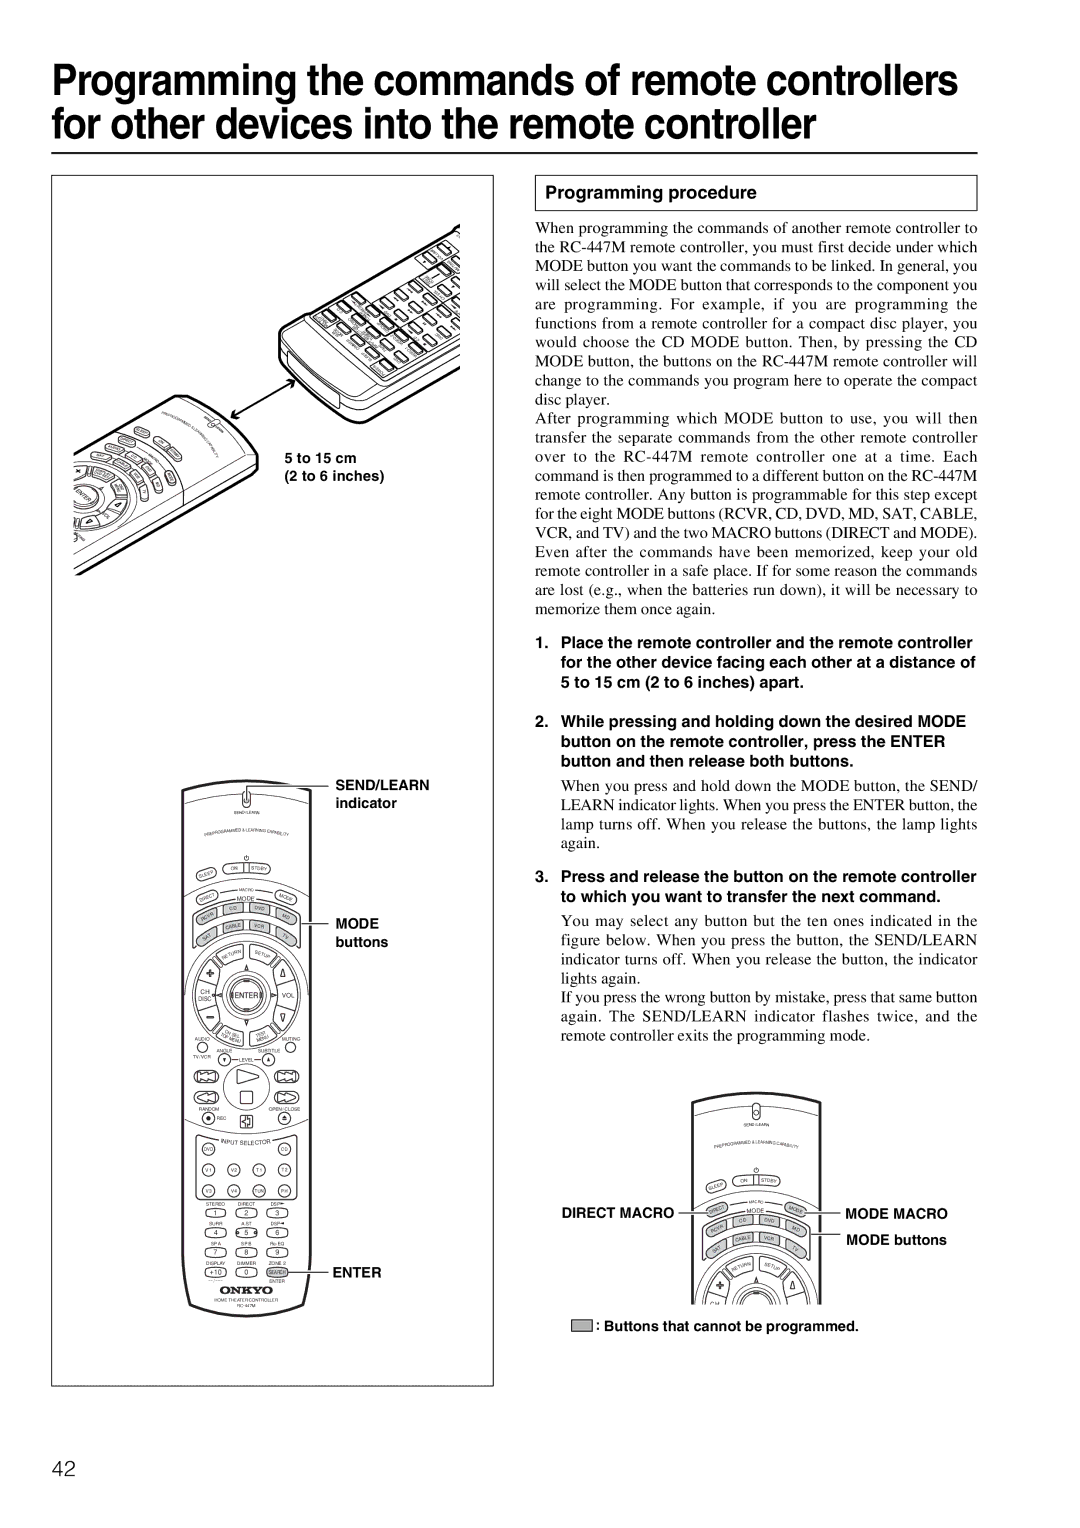 Onkyo TX-DS595 Programming procedure, To 15 cm To 6 inches, Direct Macro, Mode Macro, Buttons that cannot be programmed 